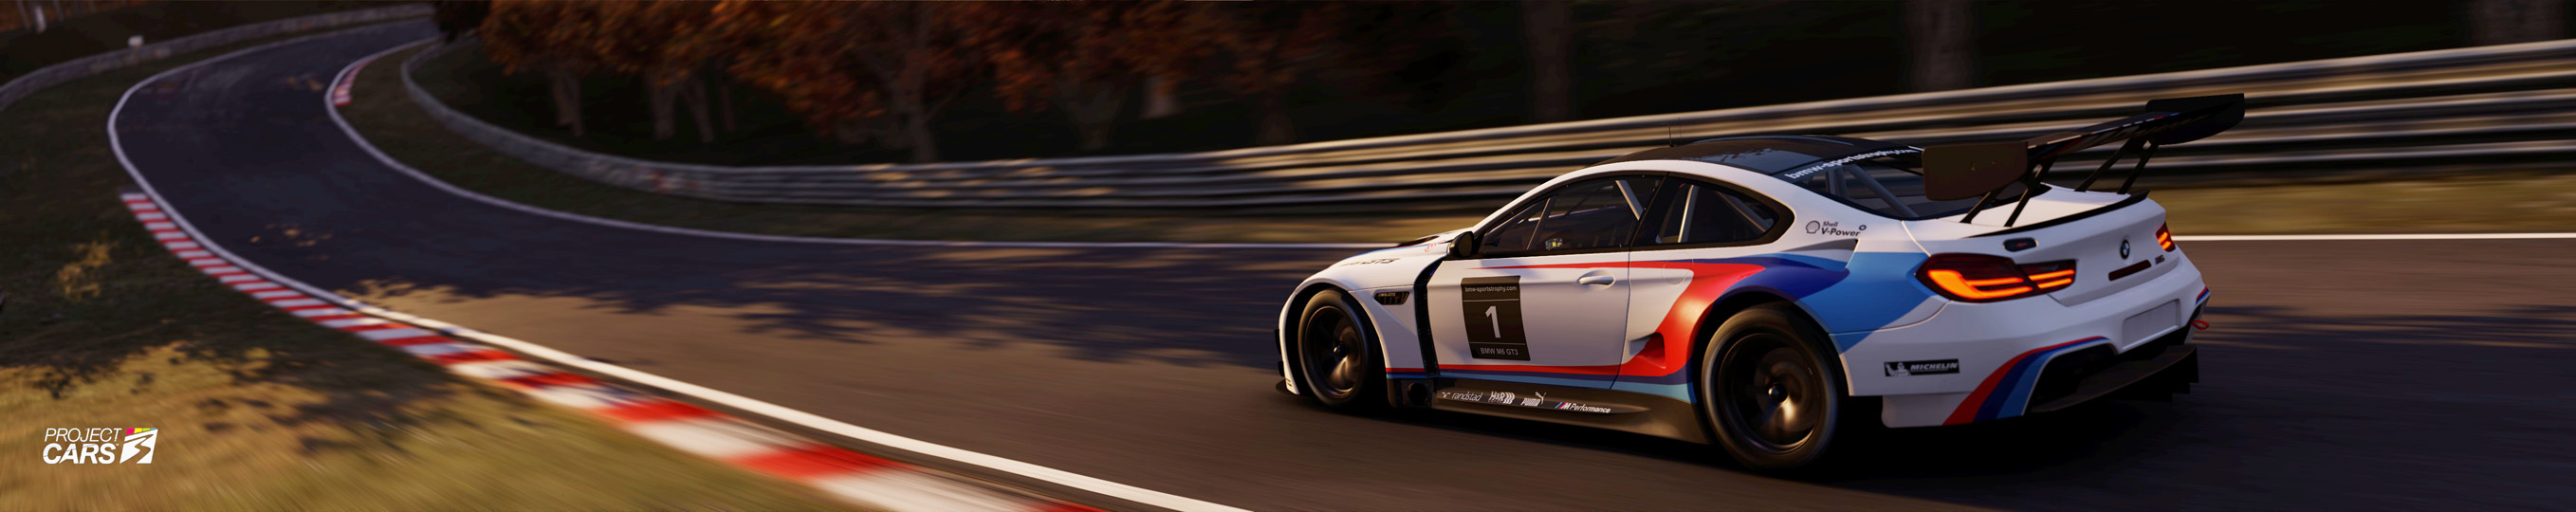 0 PROJECT CARS 3 BMW GT3 on NORDS crop copy.jpg